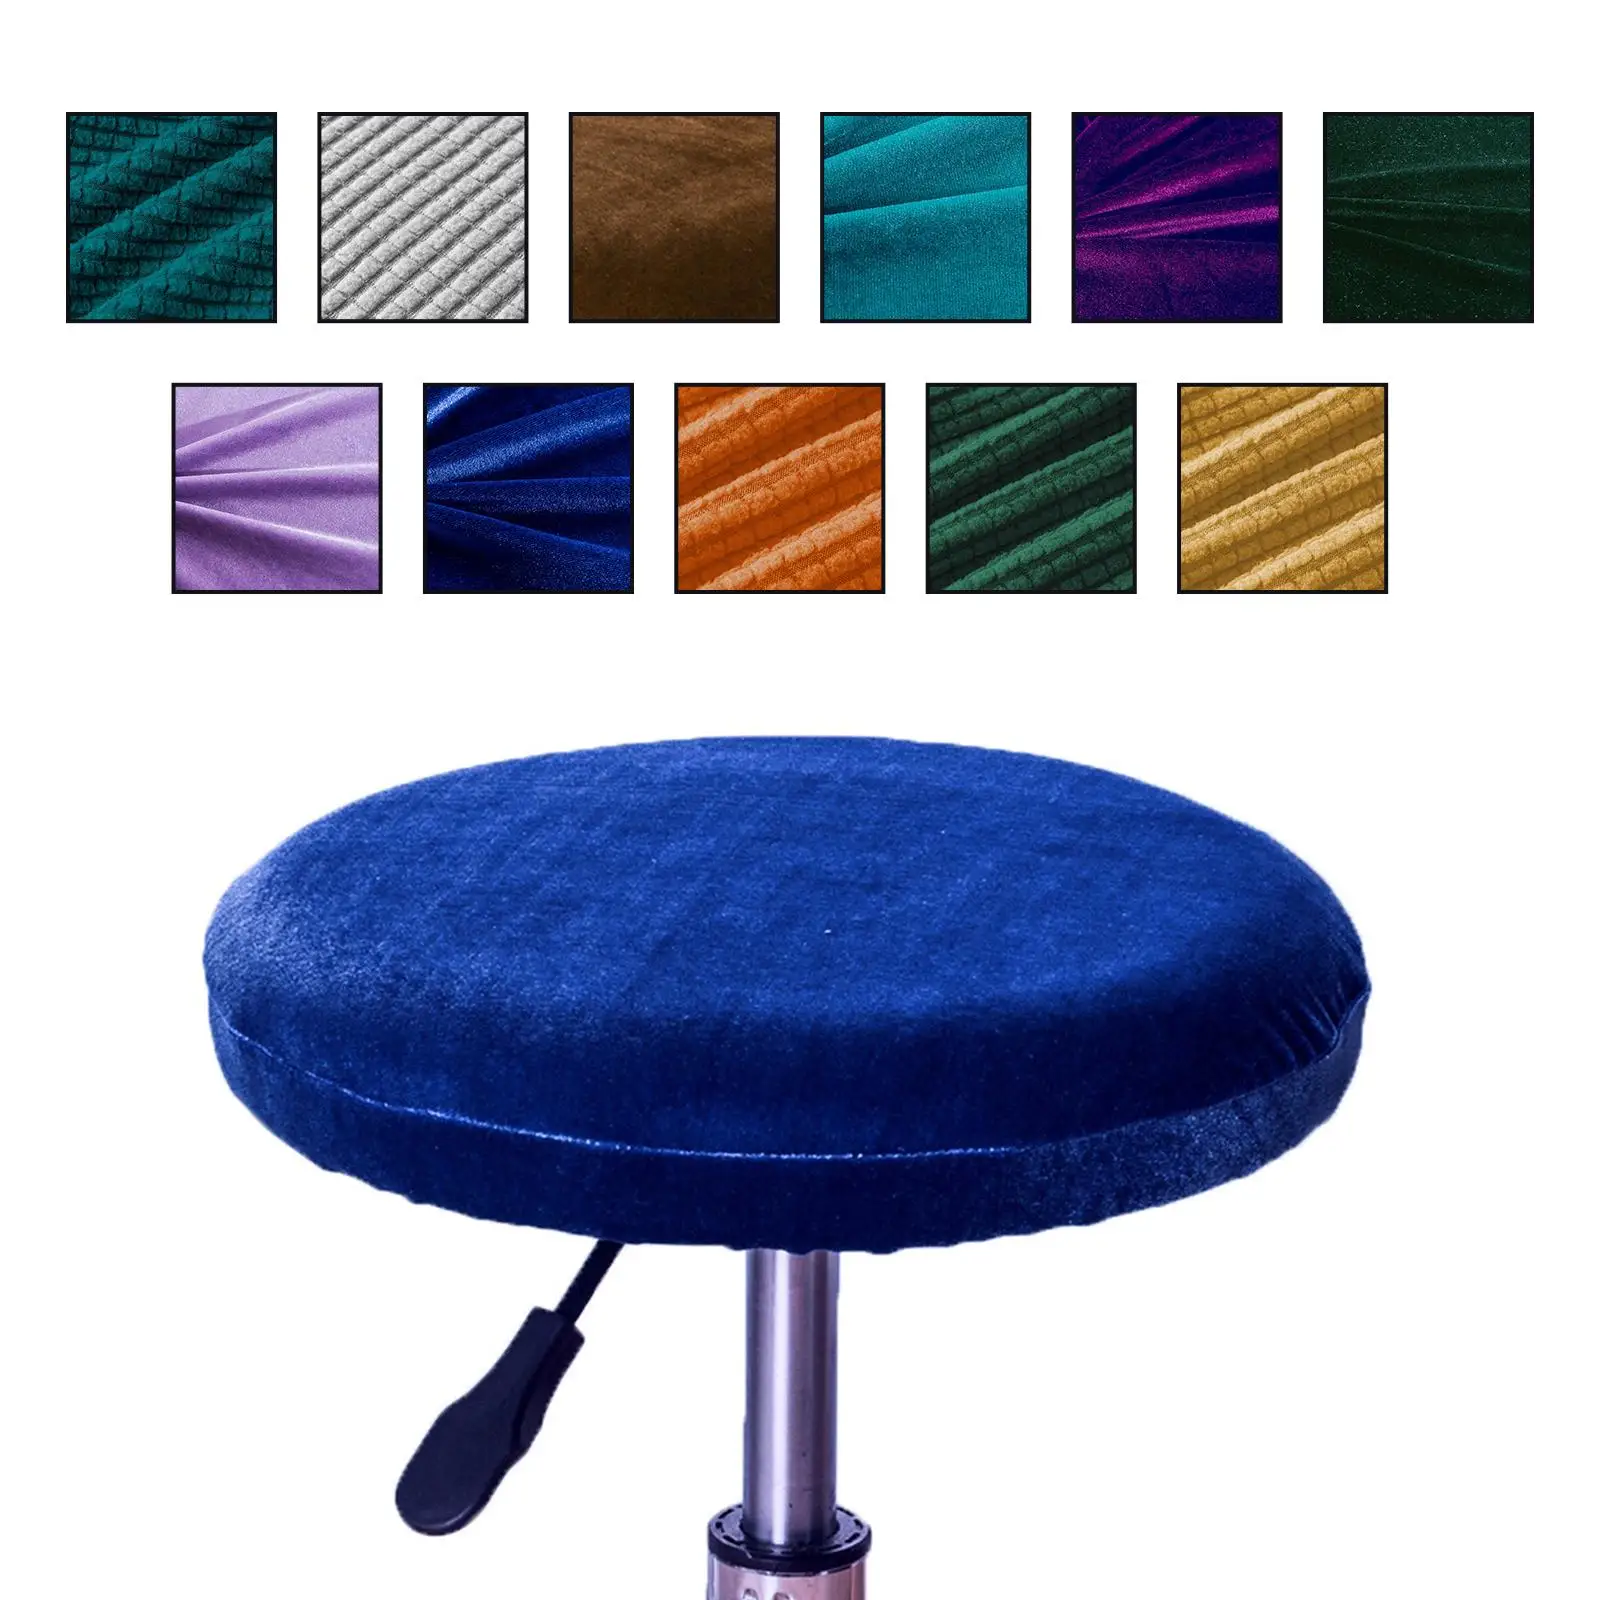 SWD TWTH Stool Cover Round Bar Stool Slipcover Waterproof Stool Protector,Seat Cushion Protectors Round Stool Covers Cushion Protectors Red,30 * 10cm 